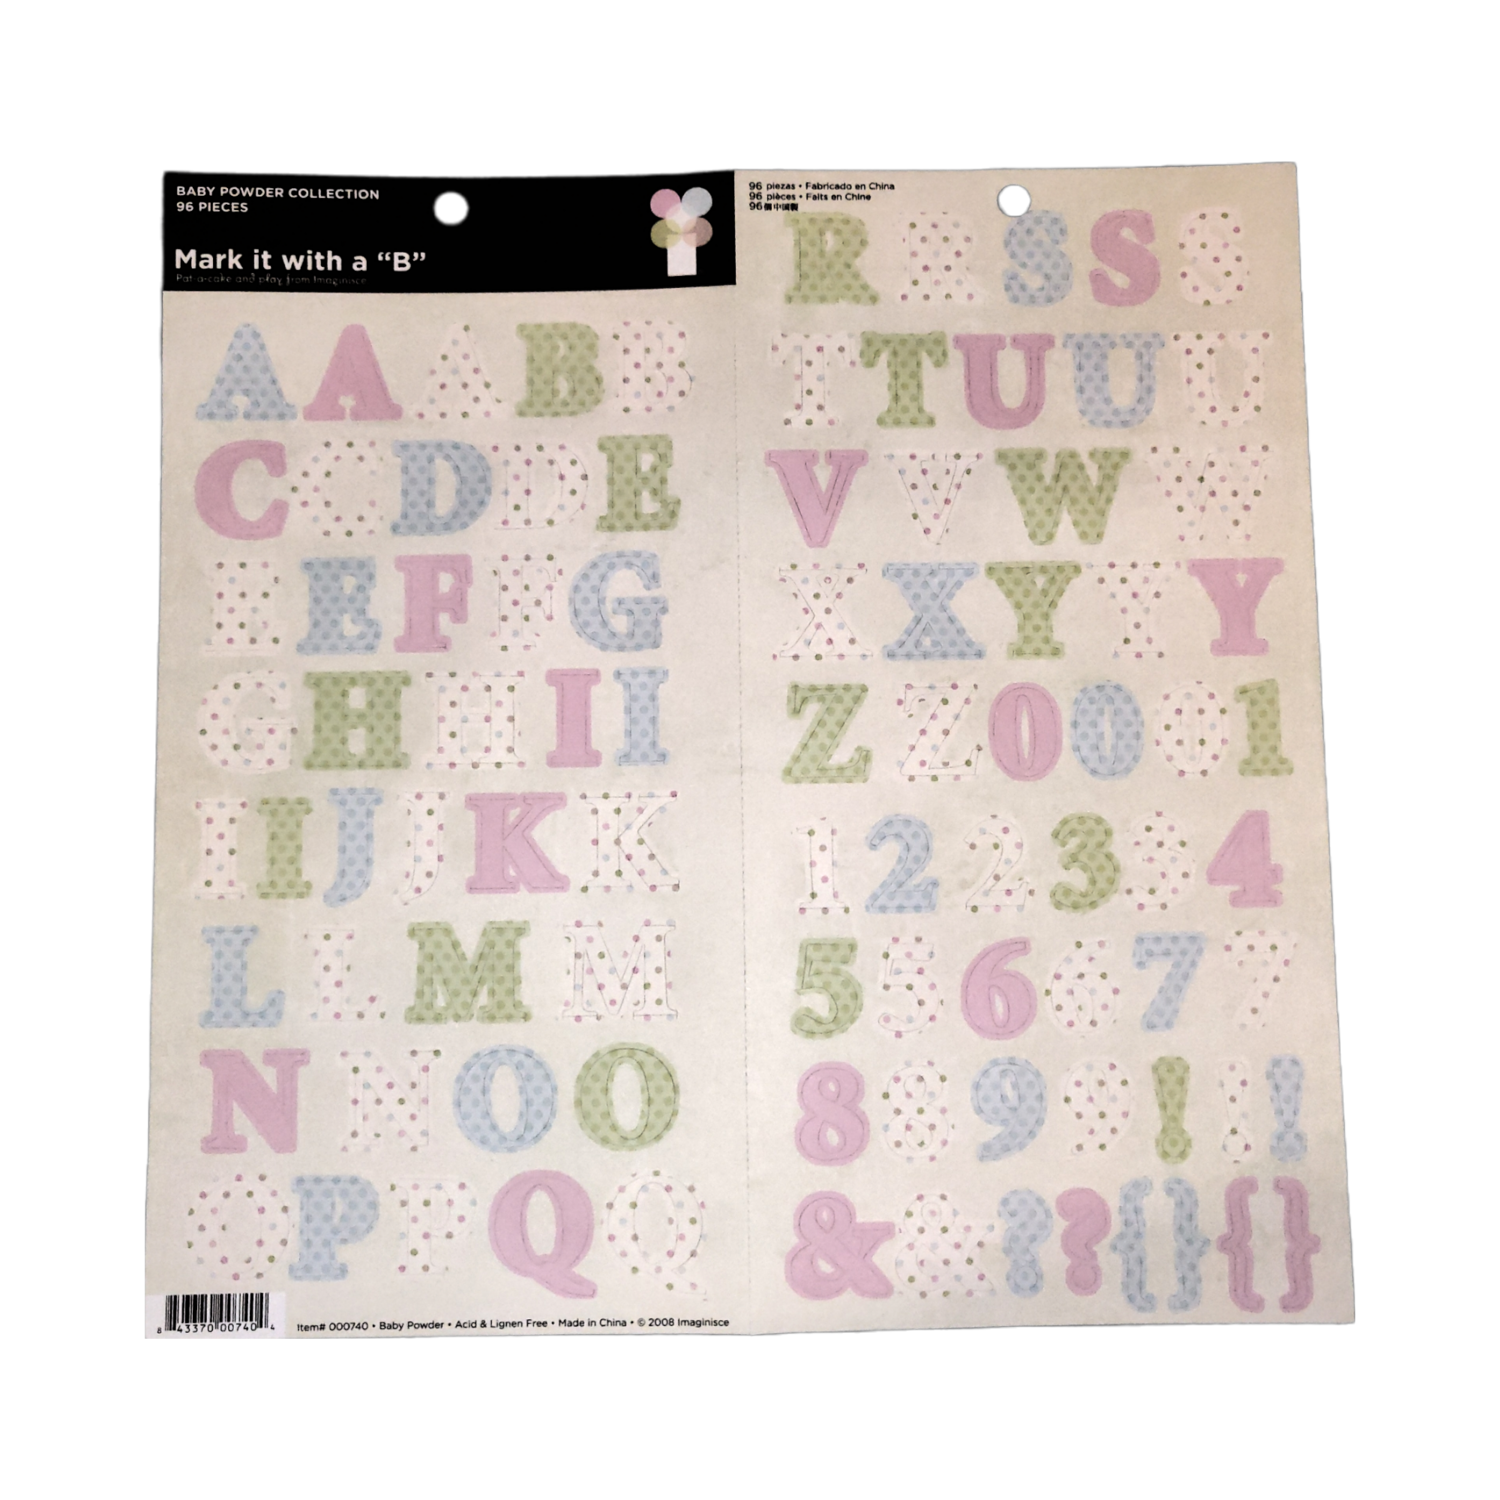 96 Découpage Letters & Numbers! 1x Sheet From the "Baby Powder" Collection by Imaginisce.